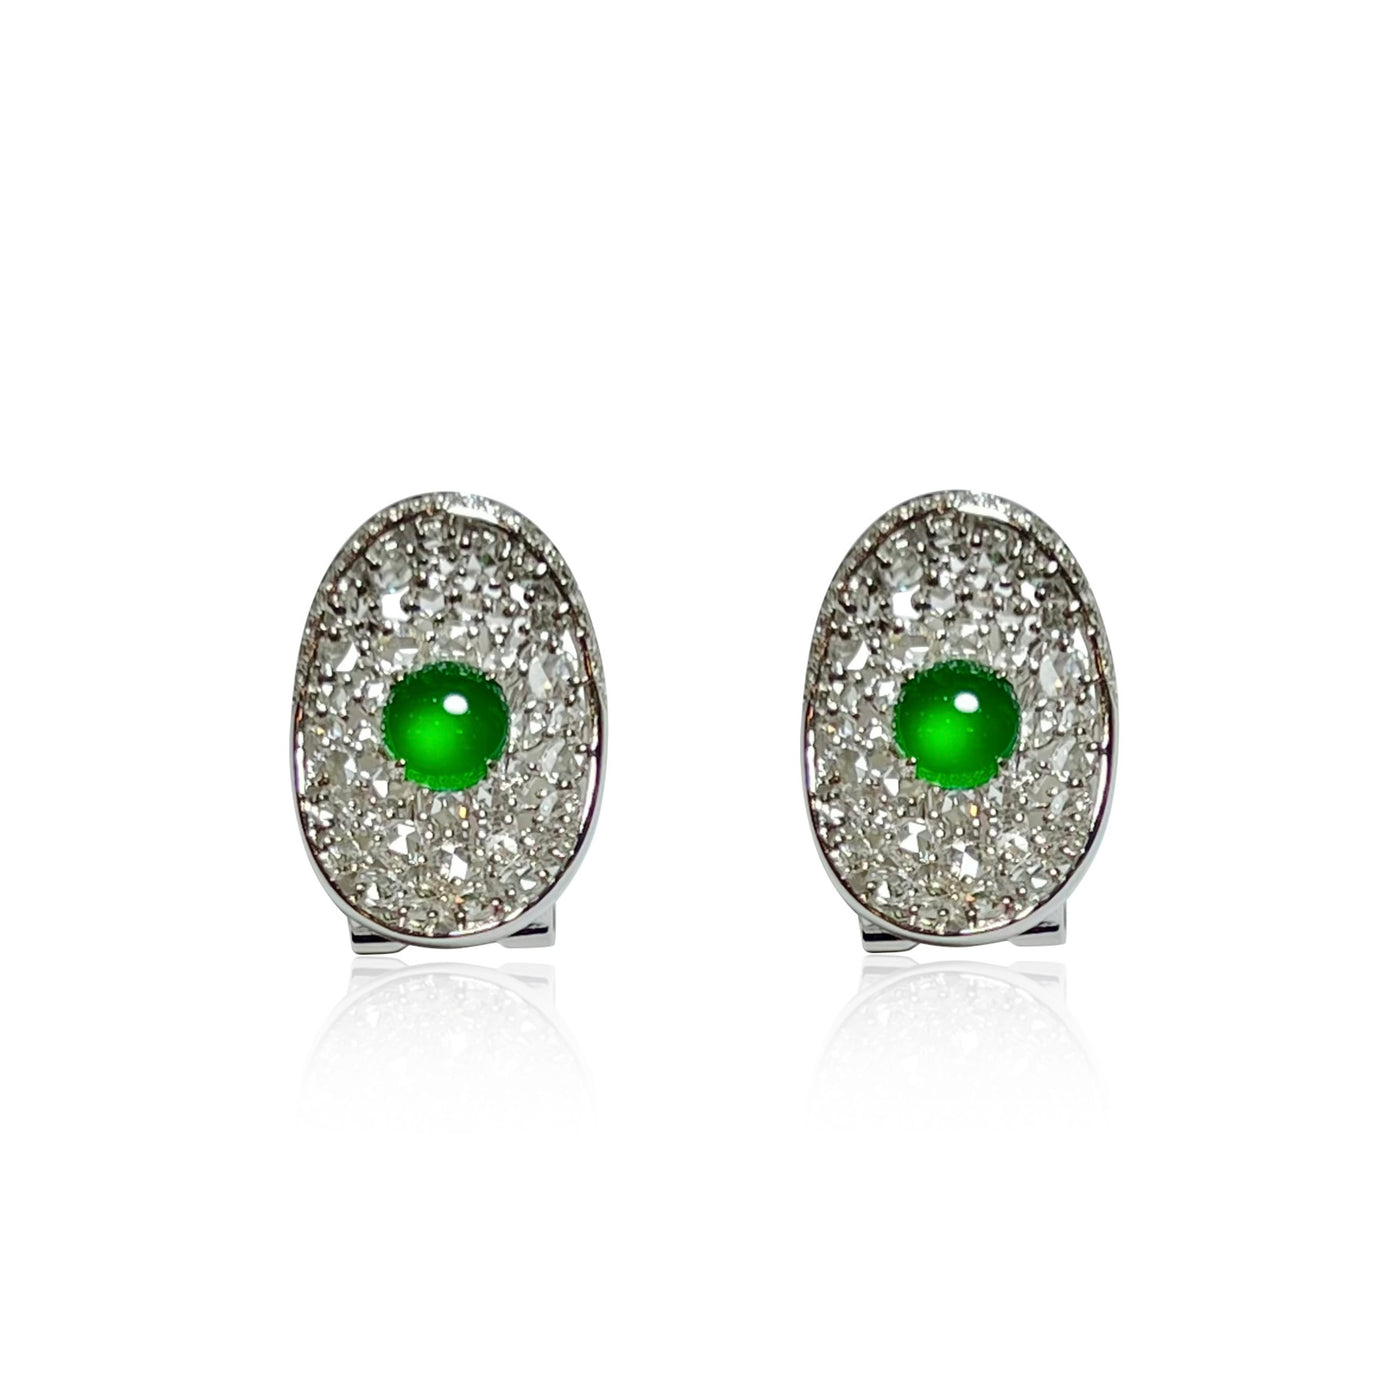 TRADITIONAL GOLD INGOT JADEITE CABOCHON EARRINGS IN 18K WHITE GOLD AND DIAMONDS